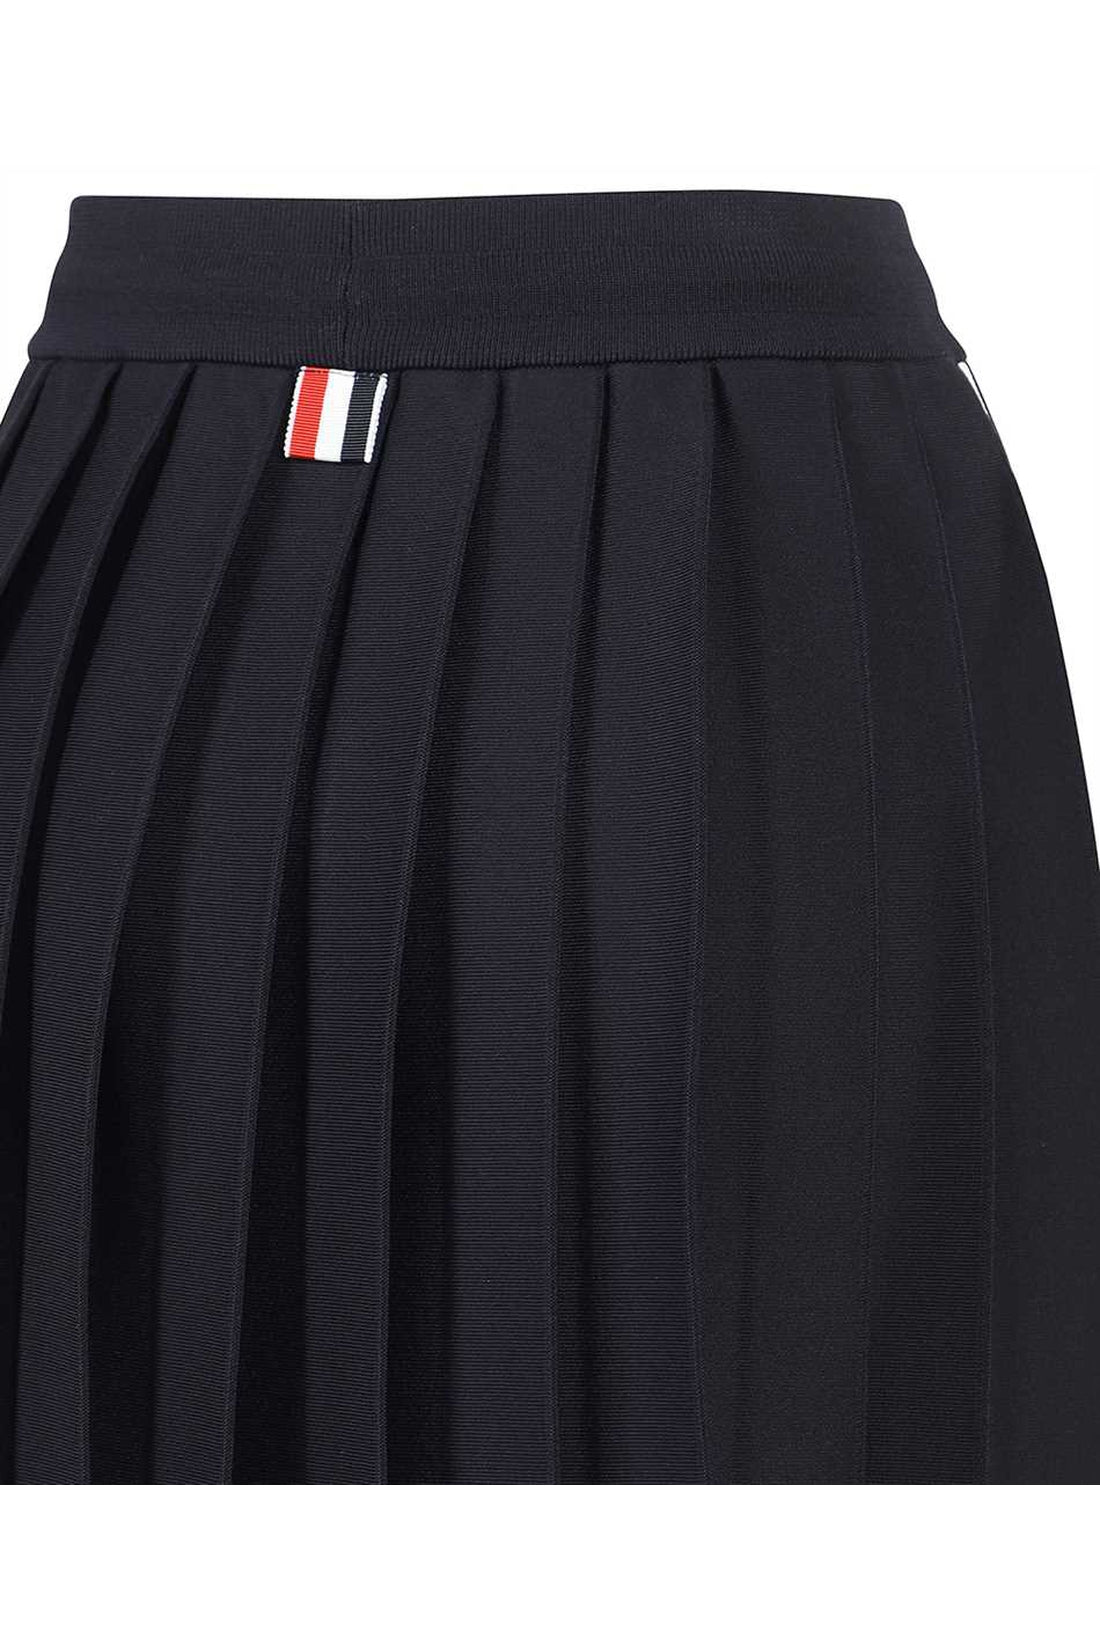 Thom Browne-OUTLET-SALE-Pleated skirt-ARCHIVIST